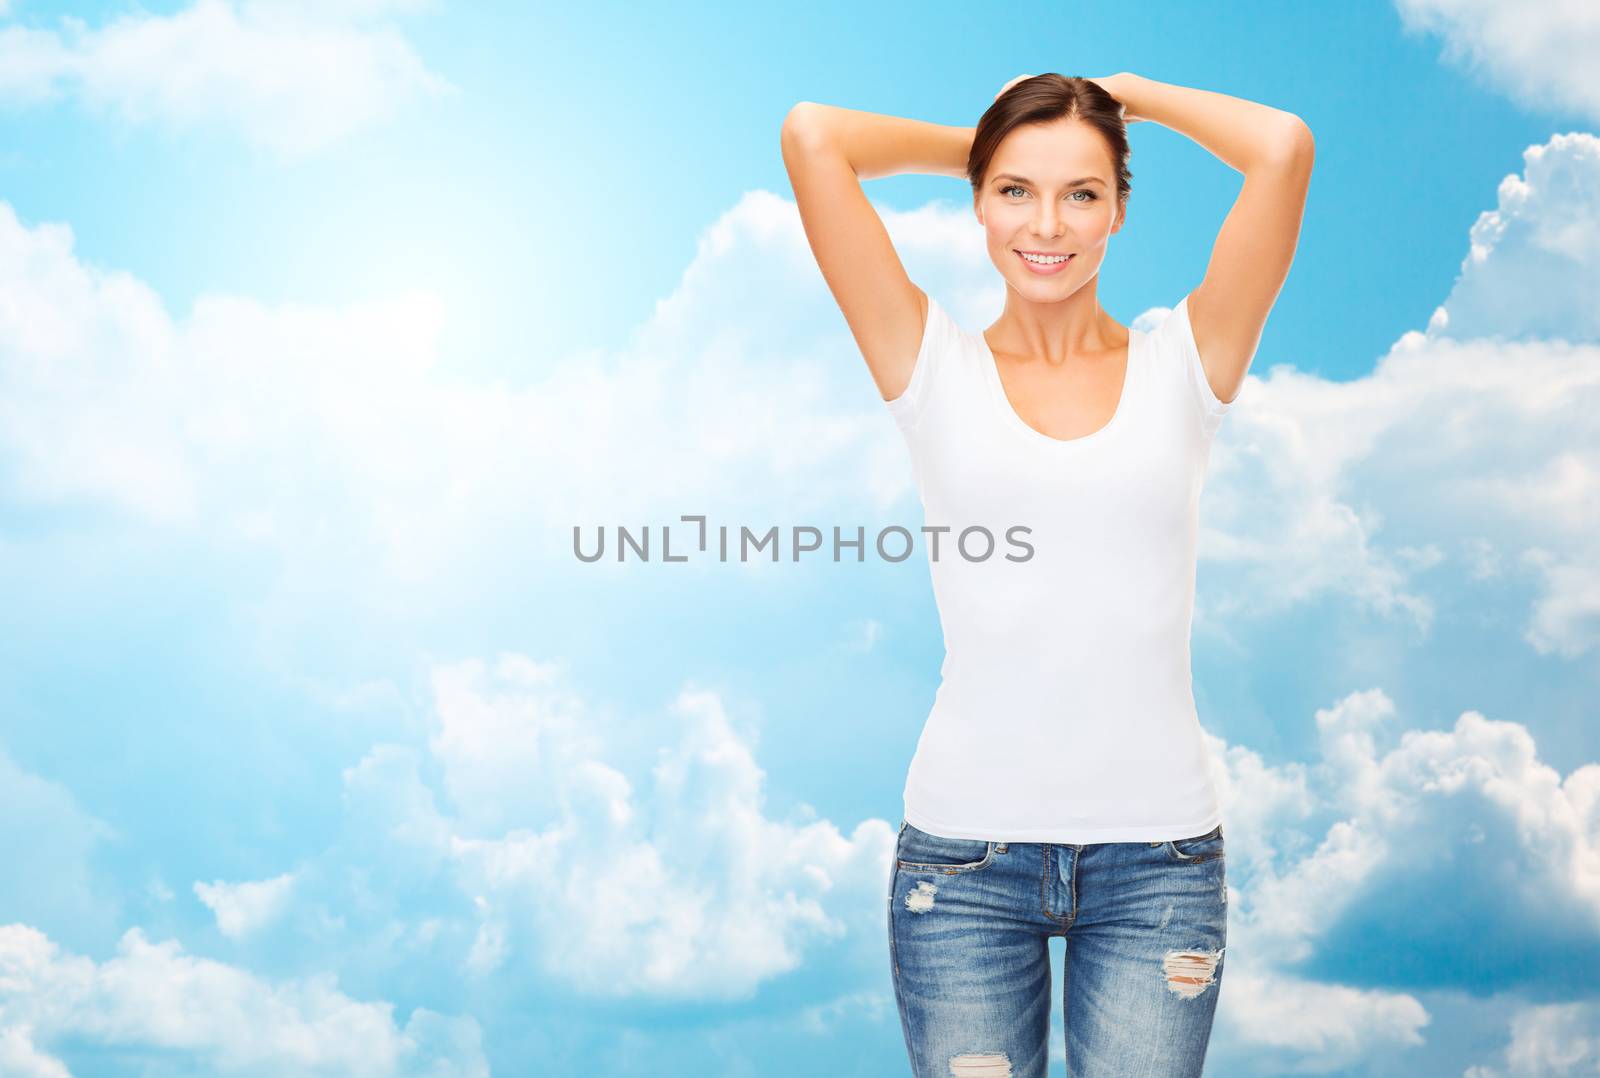 people, advertisement and clothing concept - happy woman in blank white t-shirt over blue sky with white clouds background